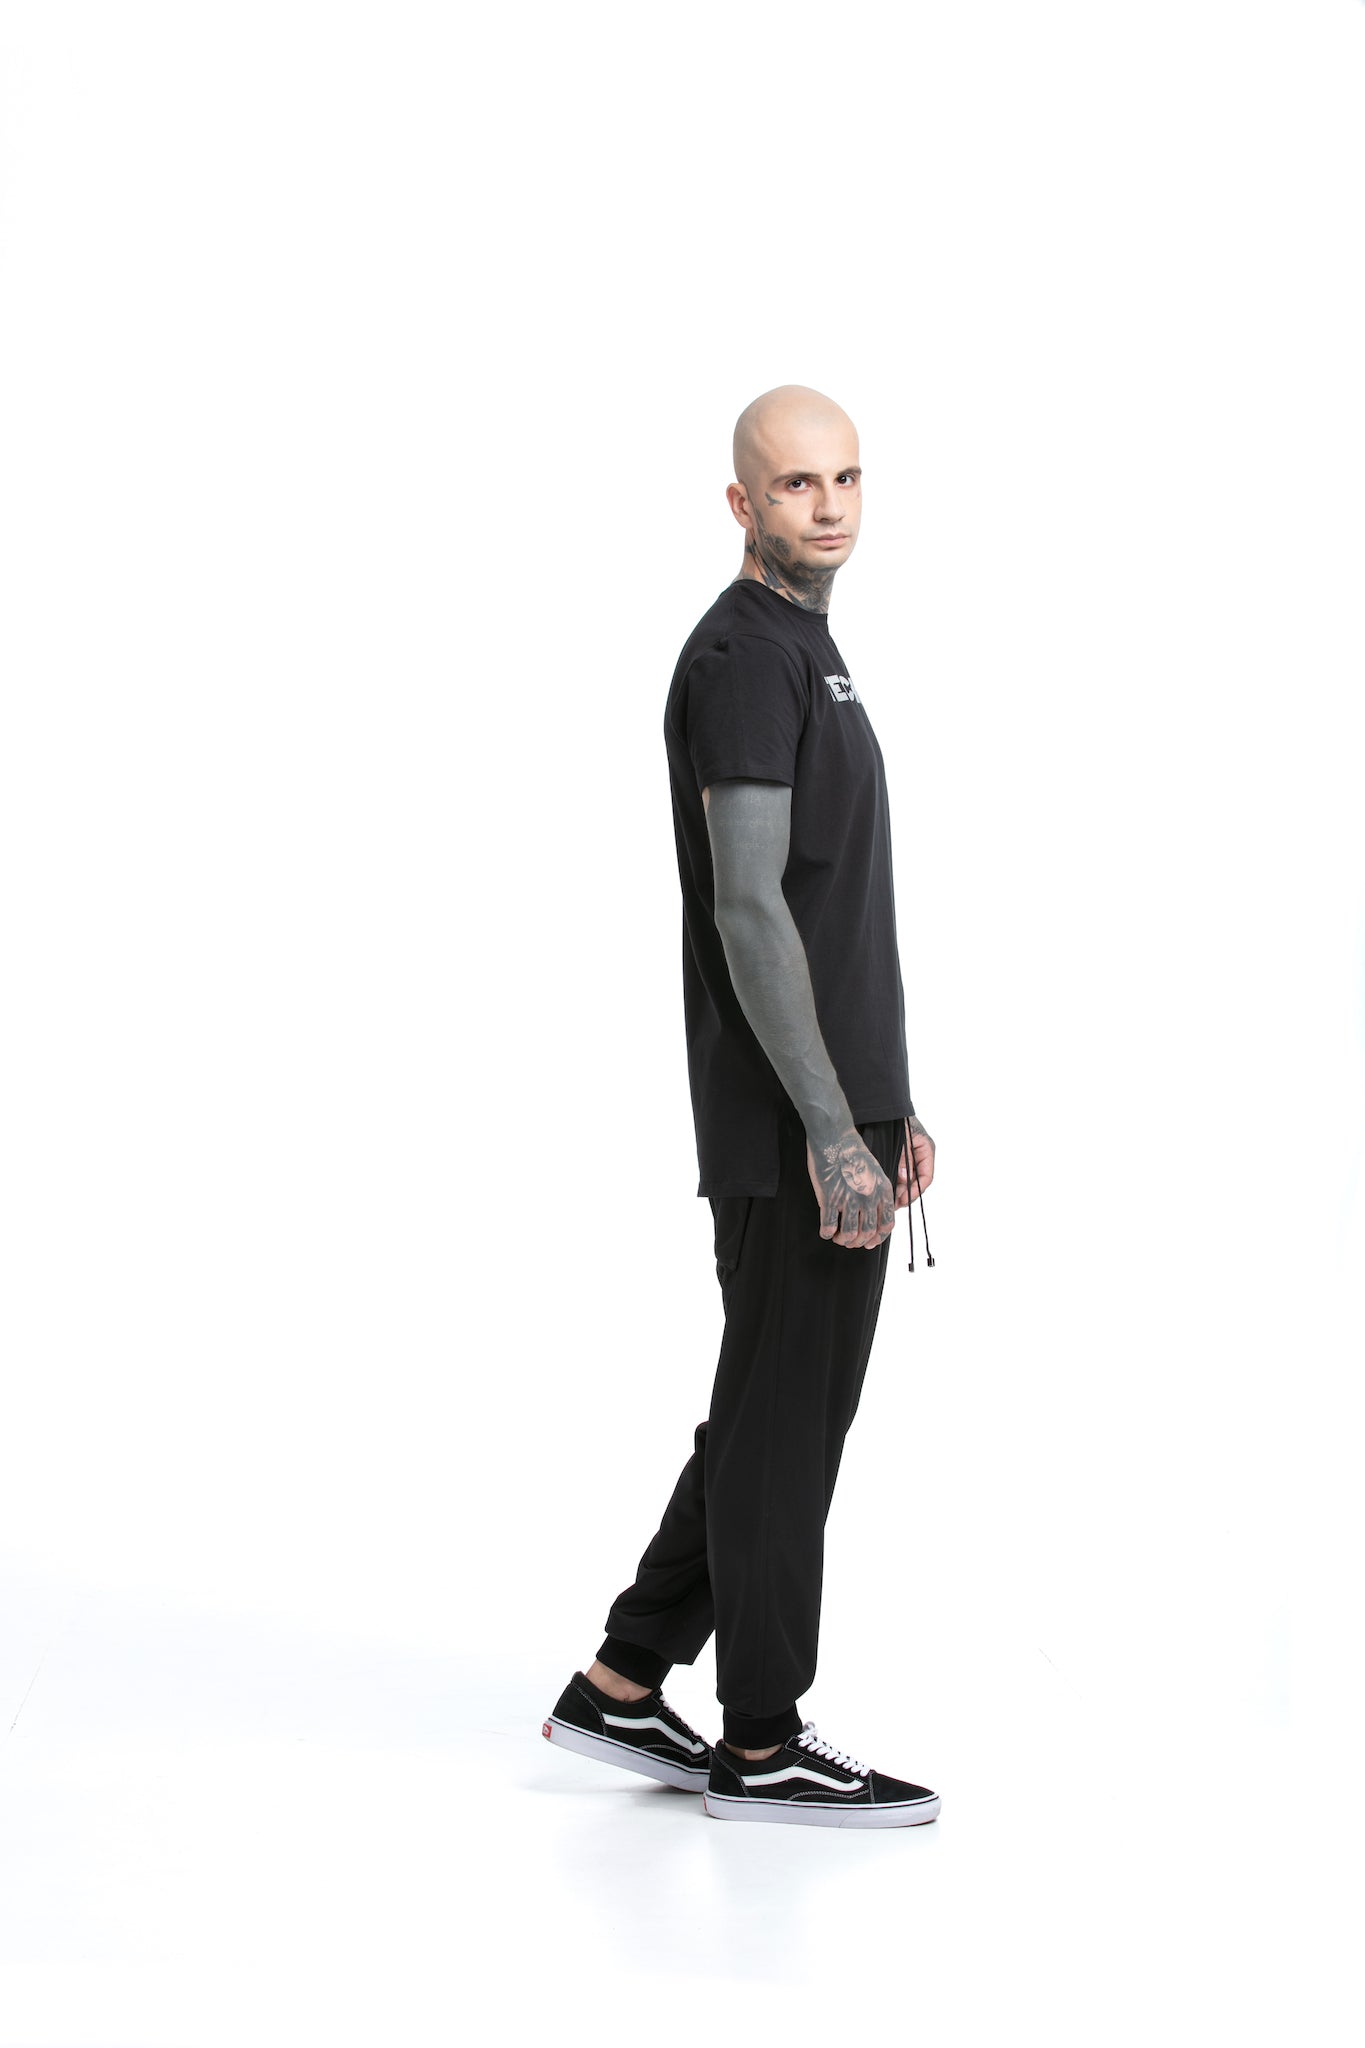 Reflective Techno - regular fit T-shirt with side cuts